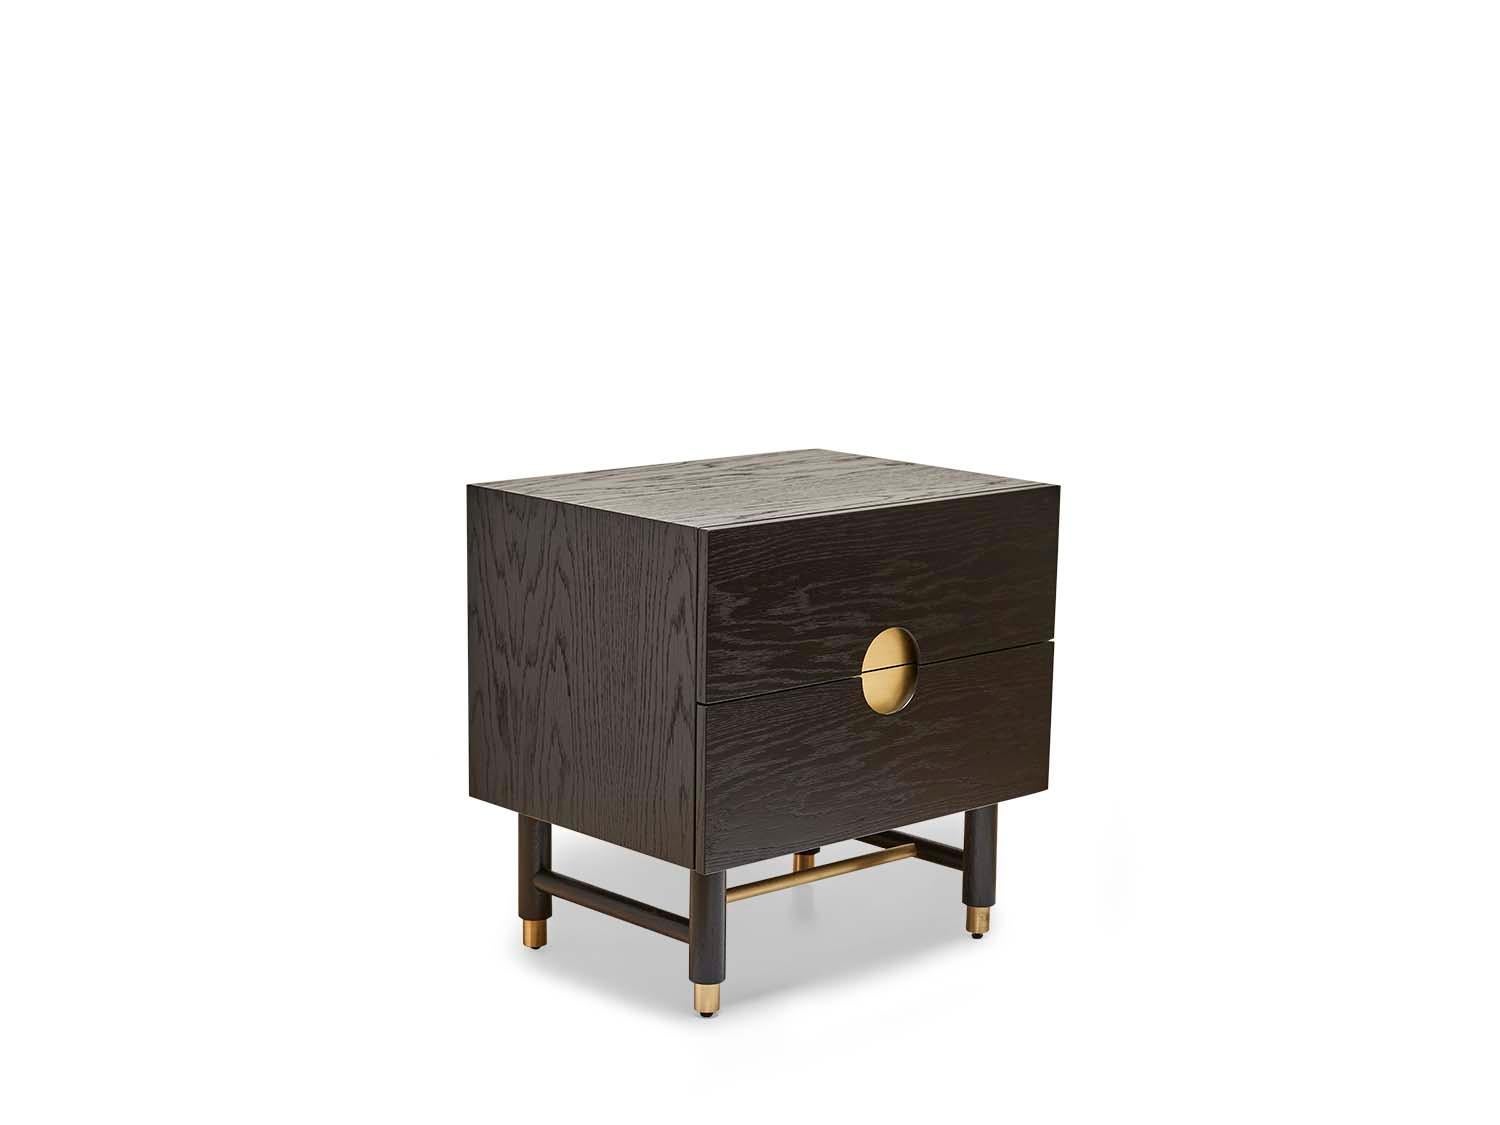 Ebonized oak niguel nightstand by Lawson-Fenning. The Niguel Nightstand features two drawers. Details include leveling brass CAP feet, a brass stretcher on the base, lacquered interior and inset brass hardware. 

The Lawson-Fenning Collection is